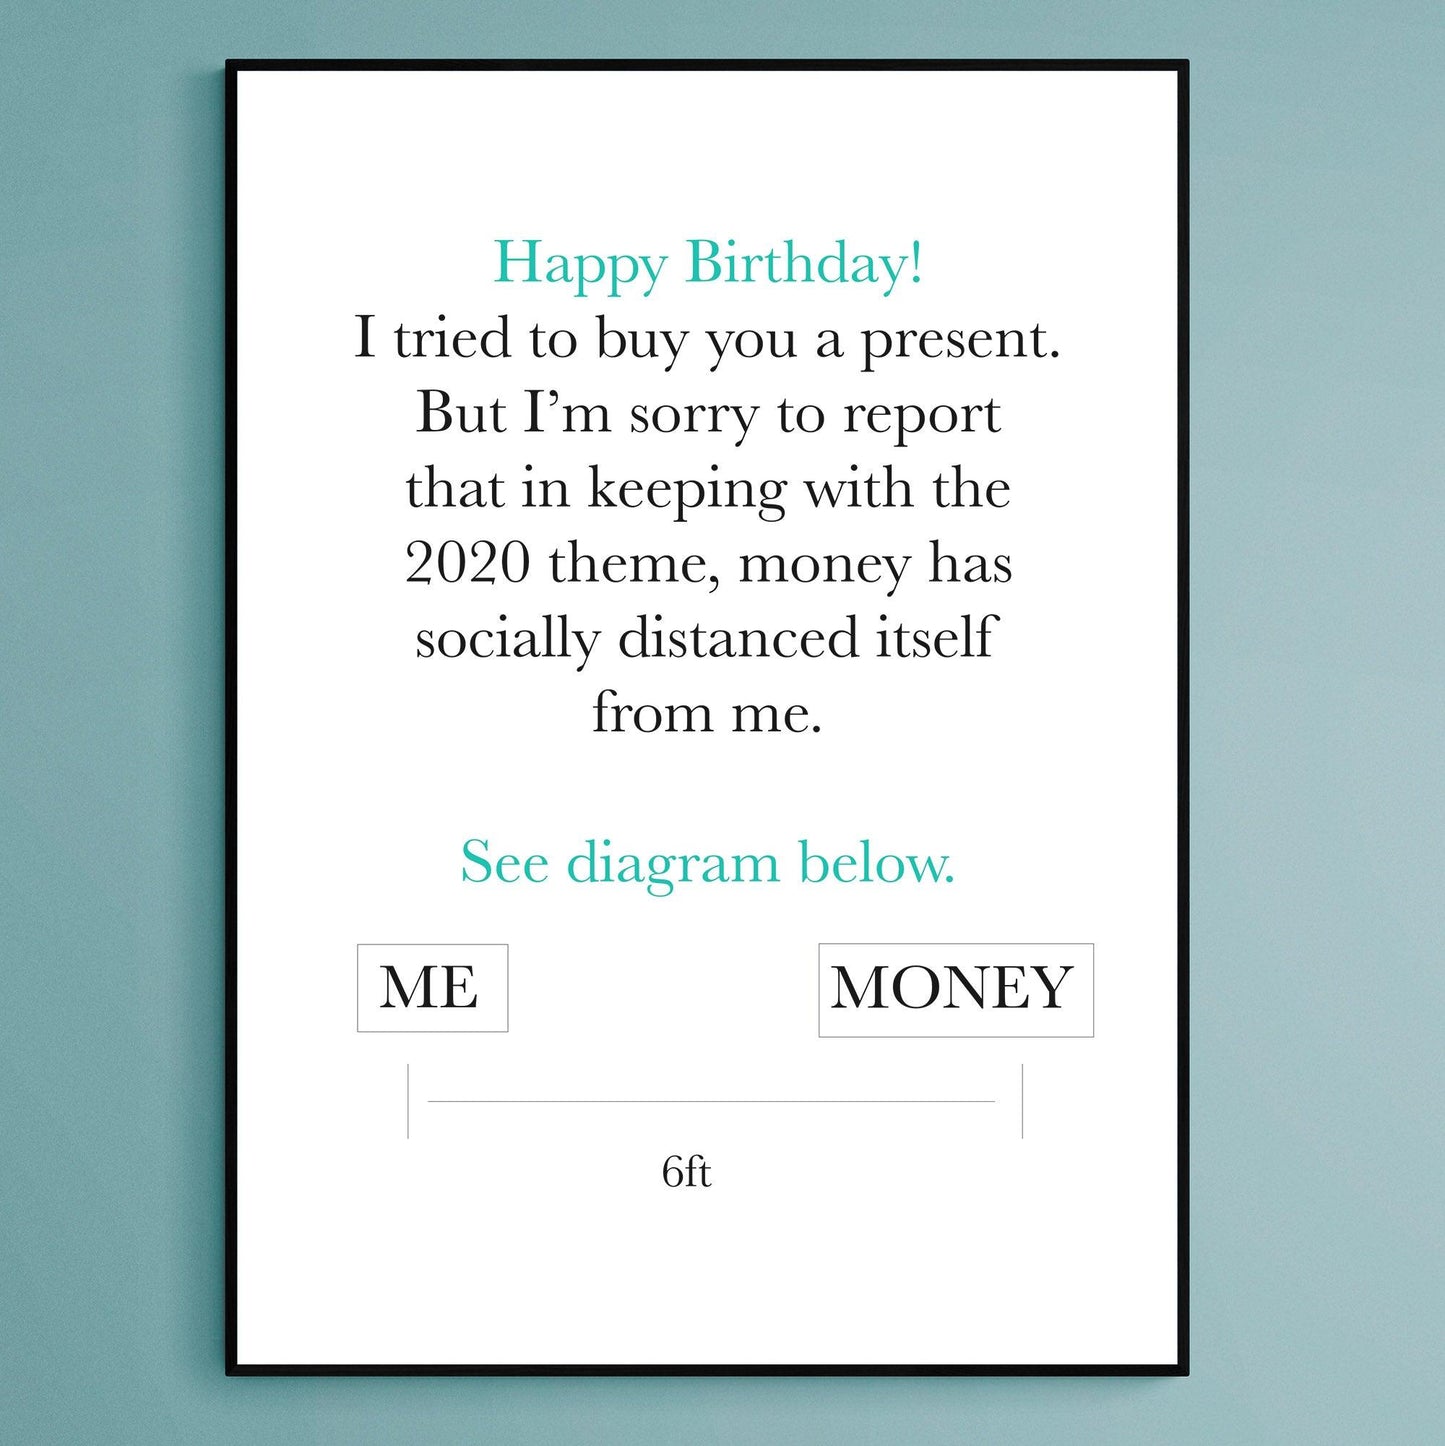 Style your small bathroom walls with an infectious smile thanks to this 'Happy Birthday 2022' print. Featuring classy art, funny posters, and colorful prints, this art is designed to make your downstairs toilet the life of the party. Get ready to be the envy of friends and family with a laugh-out-loud scene brought to life in your home.- 98types